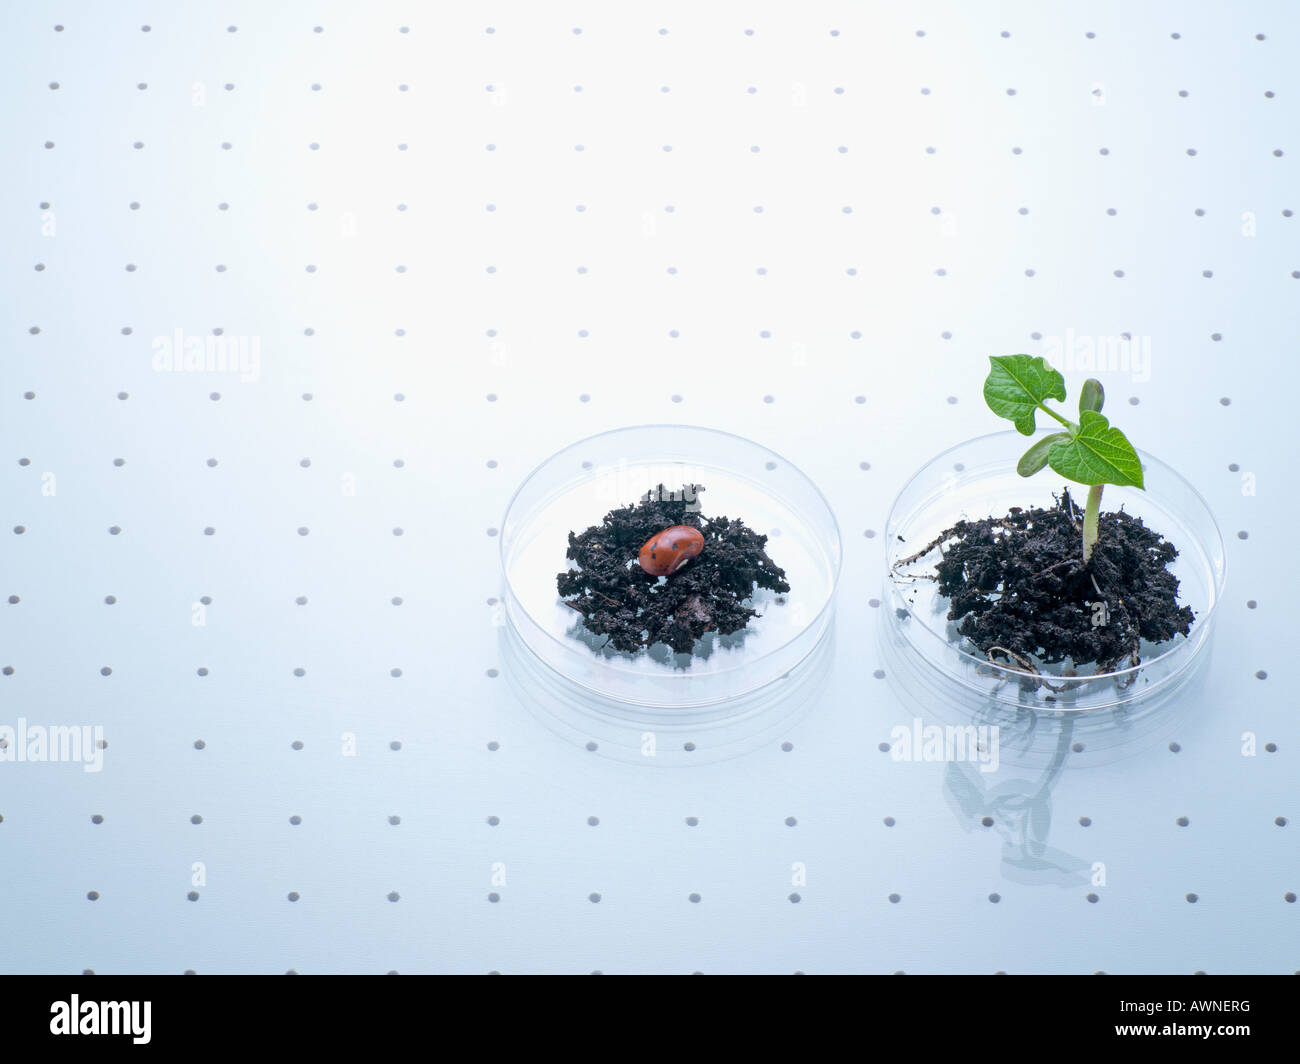 A seed and a plant in a petri dish Stock Photo